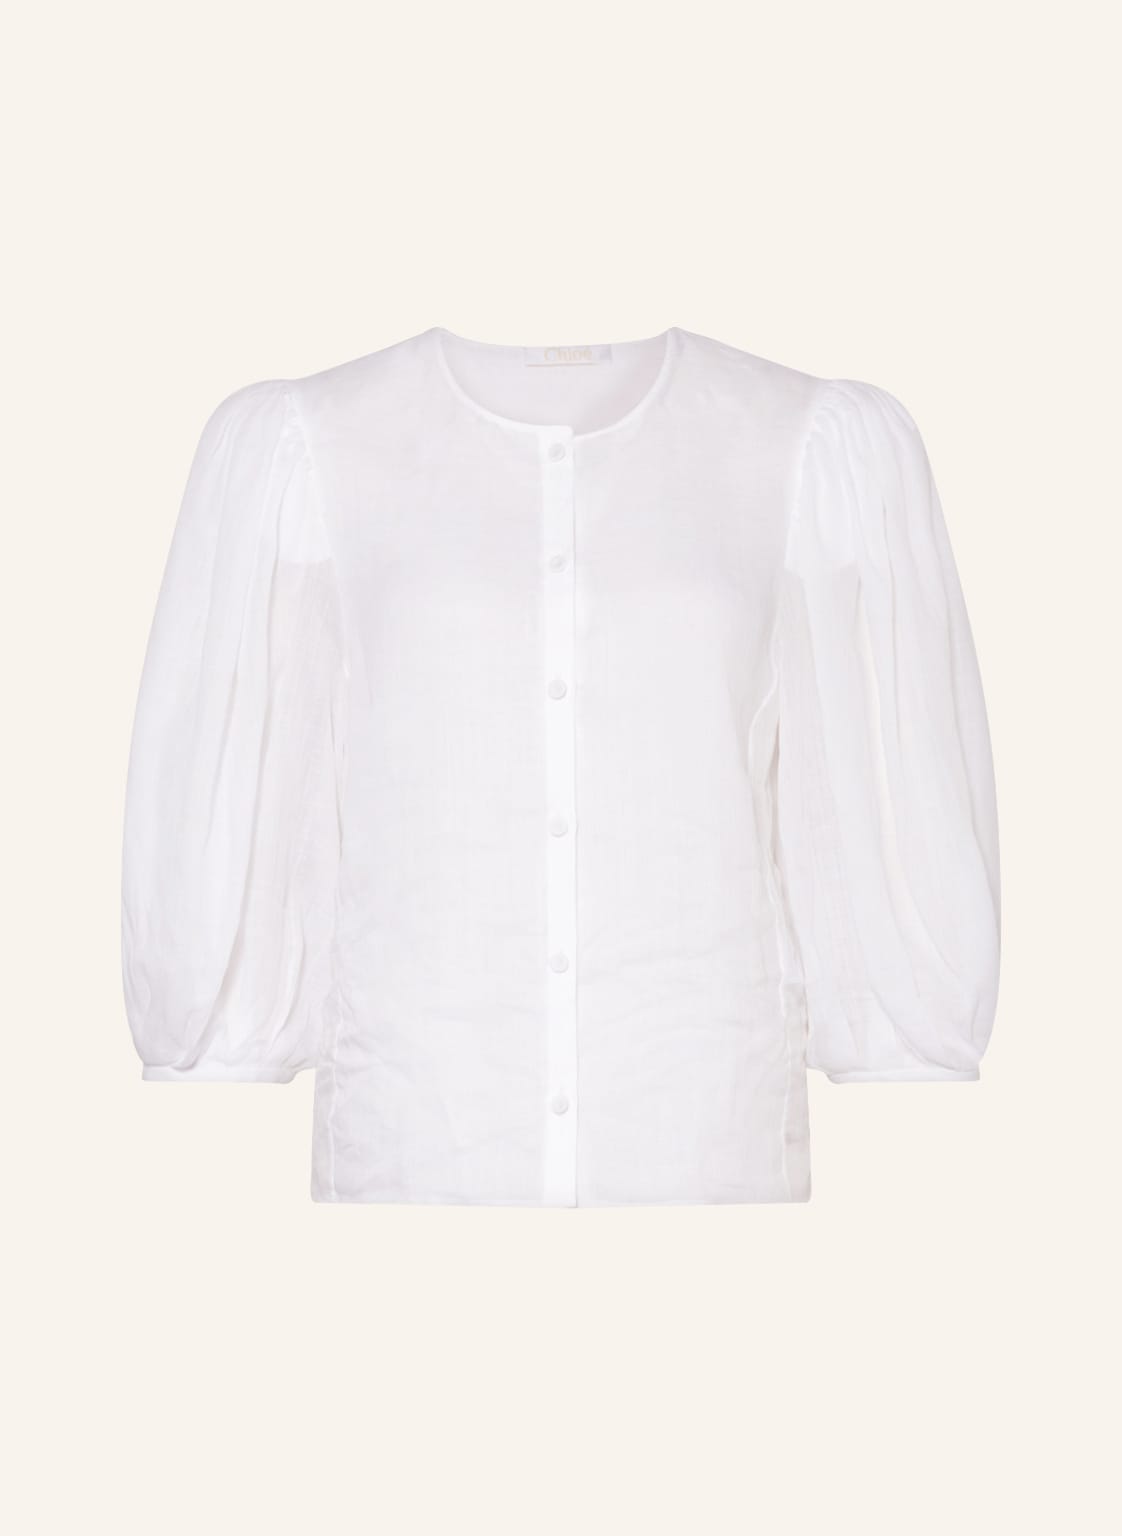 Image of Chloé Bluse Mit 3/4-Arm weiss